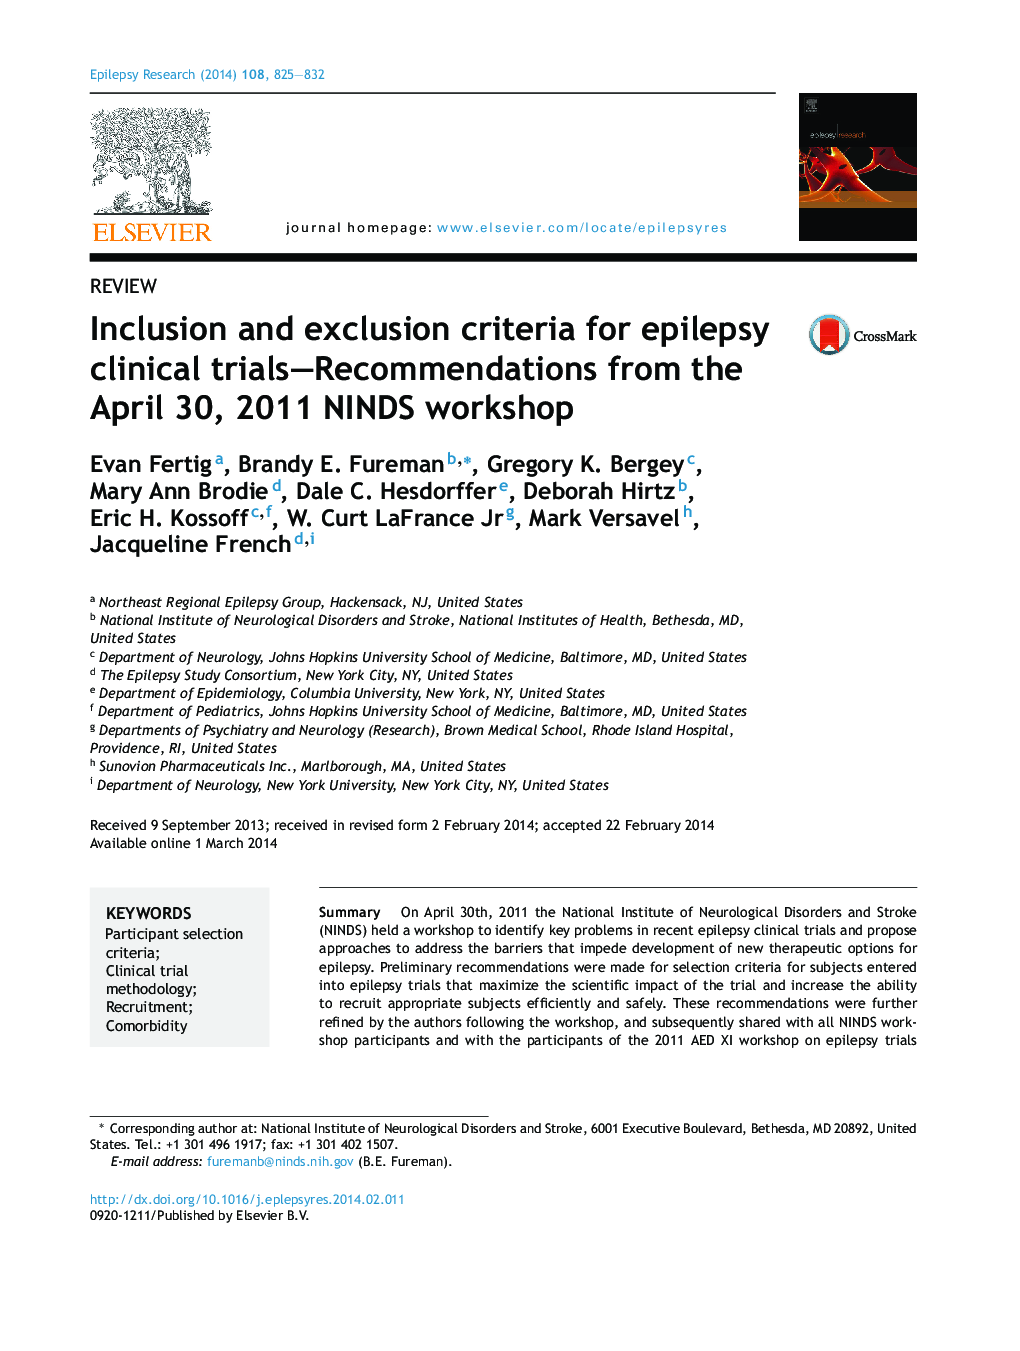 ReviewInclusion and exclusion criteria for epilepsy clinical trials-Recommendations from the April 30, 2011 NINDS workshop